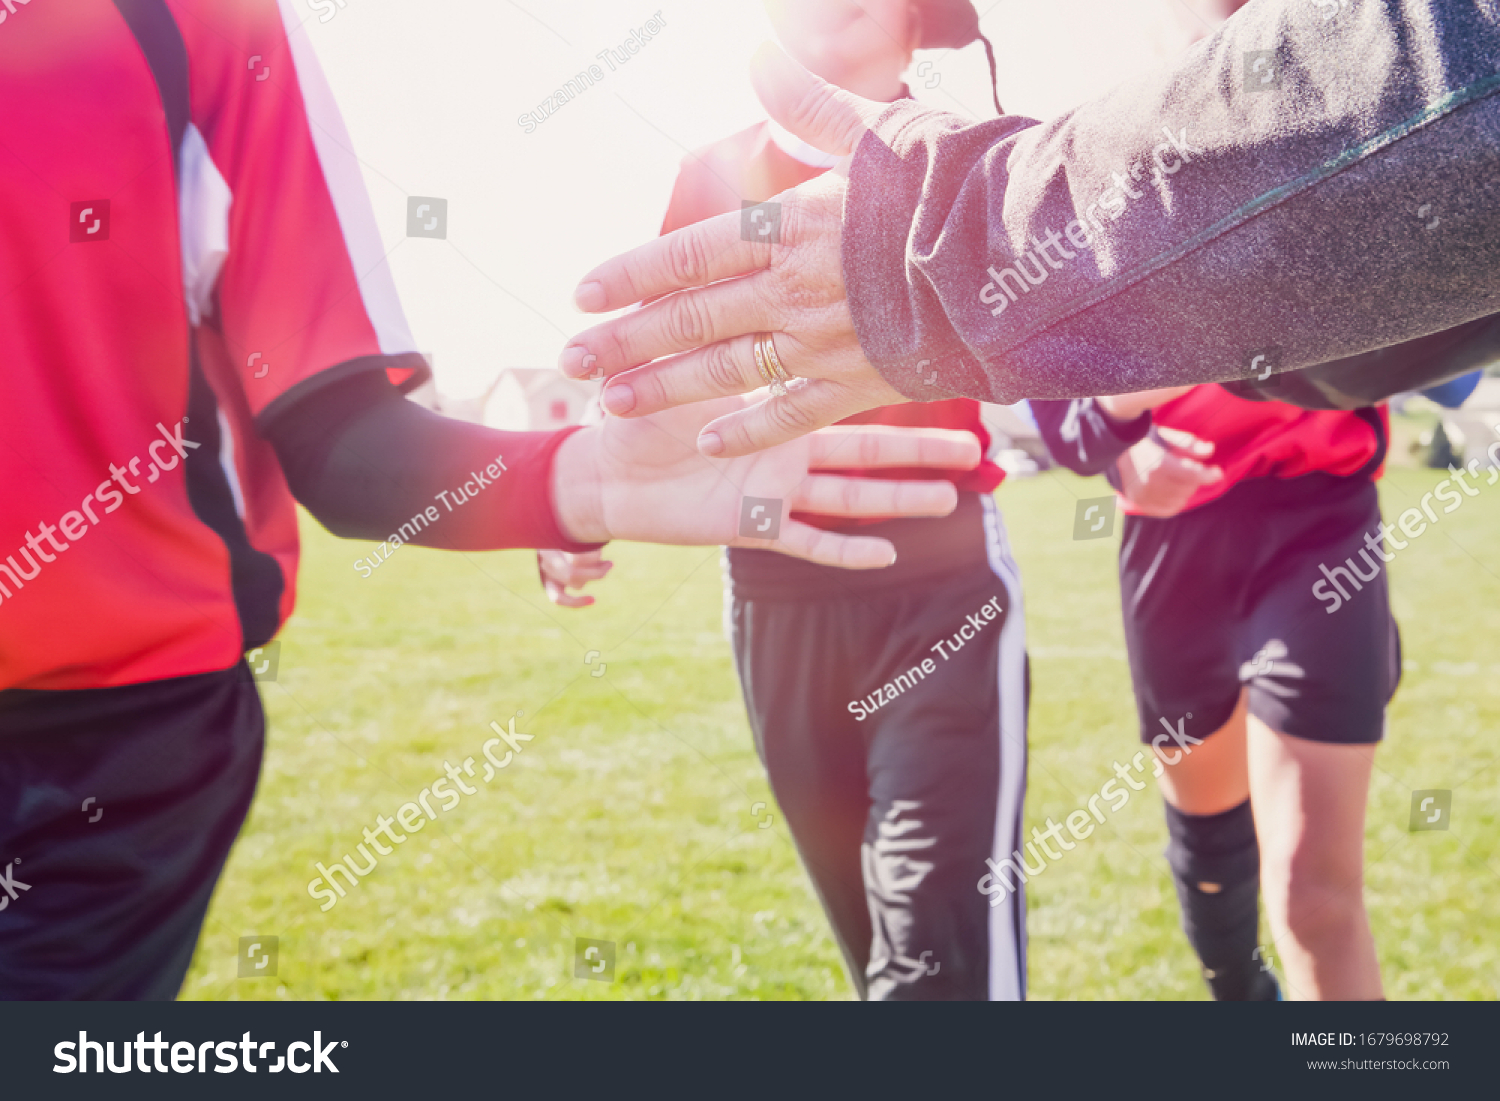 High Five line after a childs soccer game toned image, focus on adult hand #1679698792